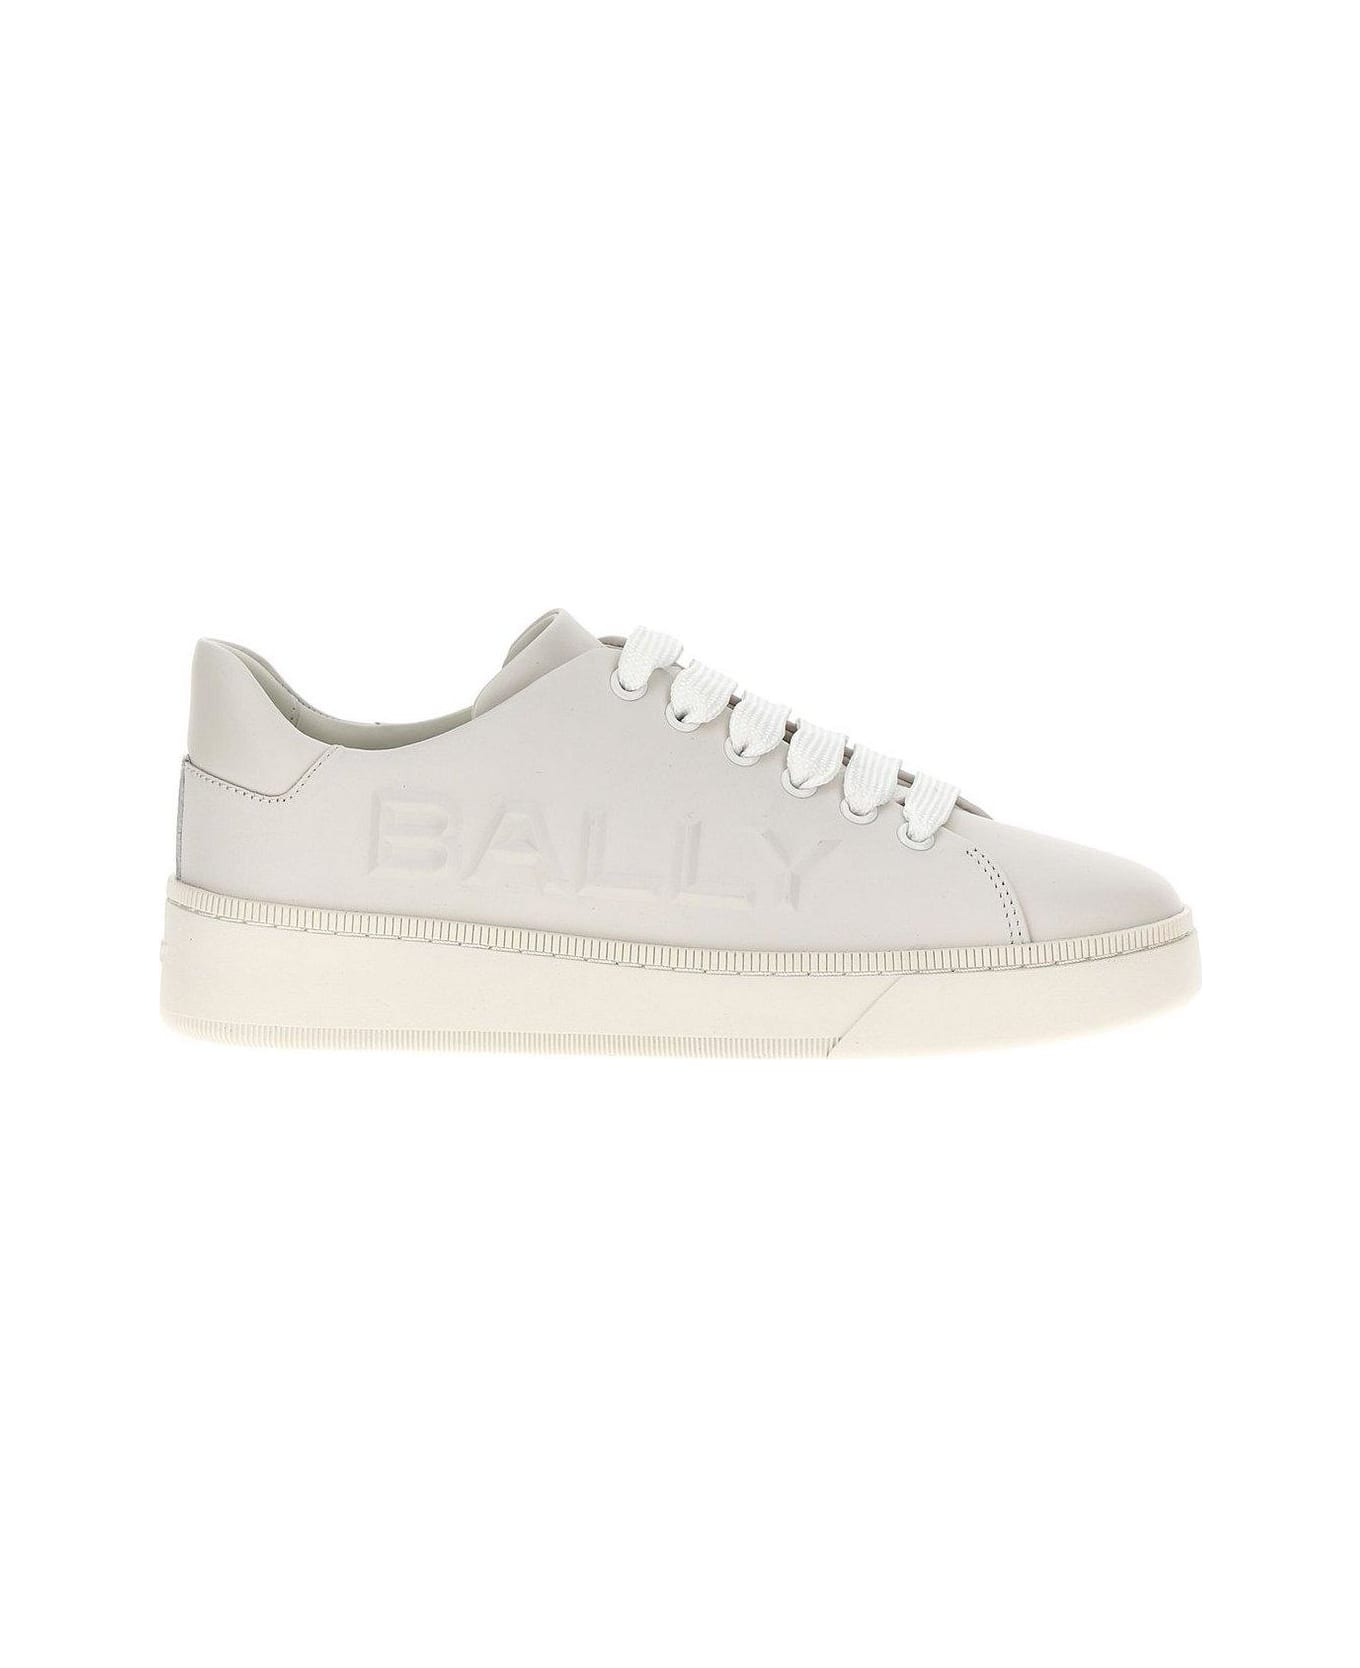 Bally Round Toe Lace-up Sneakers - White